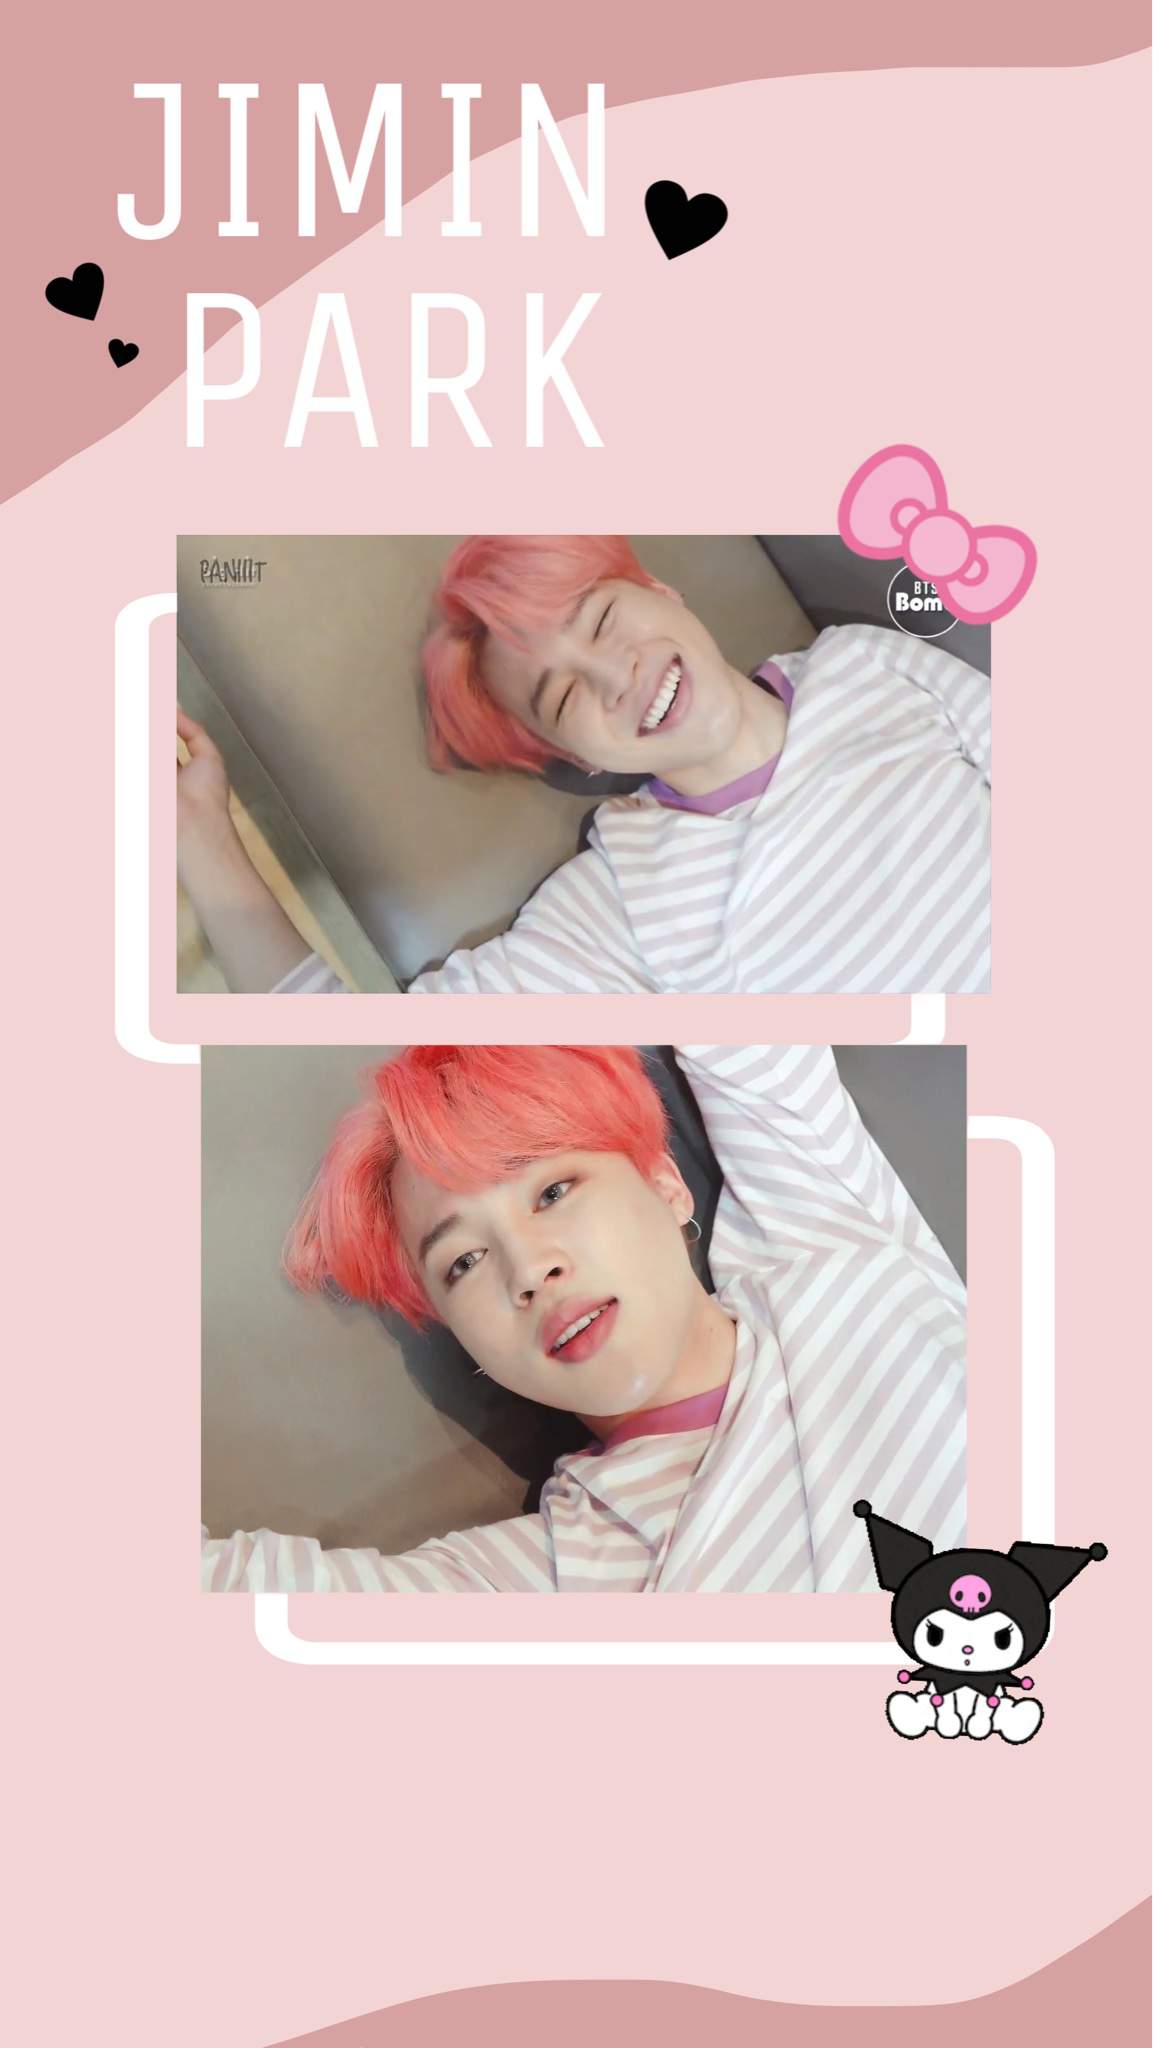 Jimin wallpaper I made! Let me know if you want me to make more - Birthday, Jimin